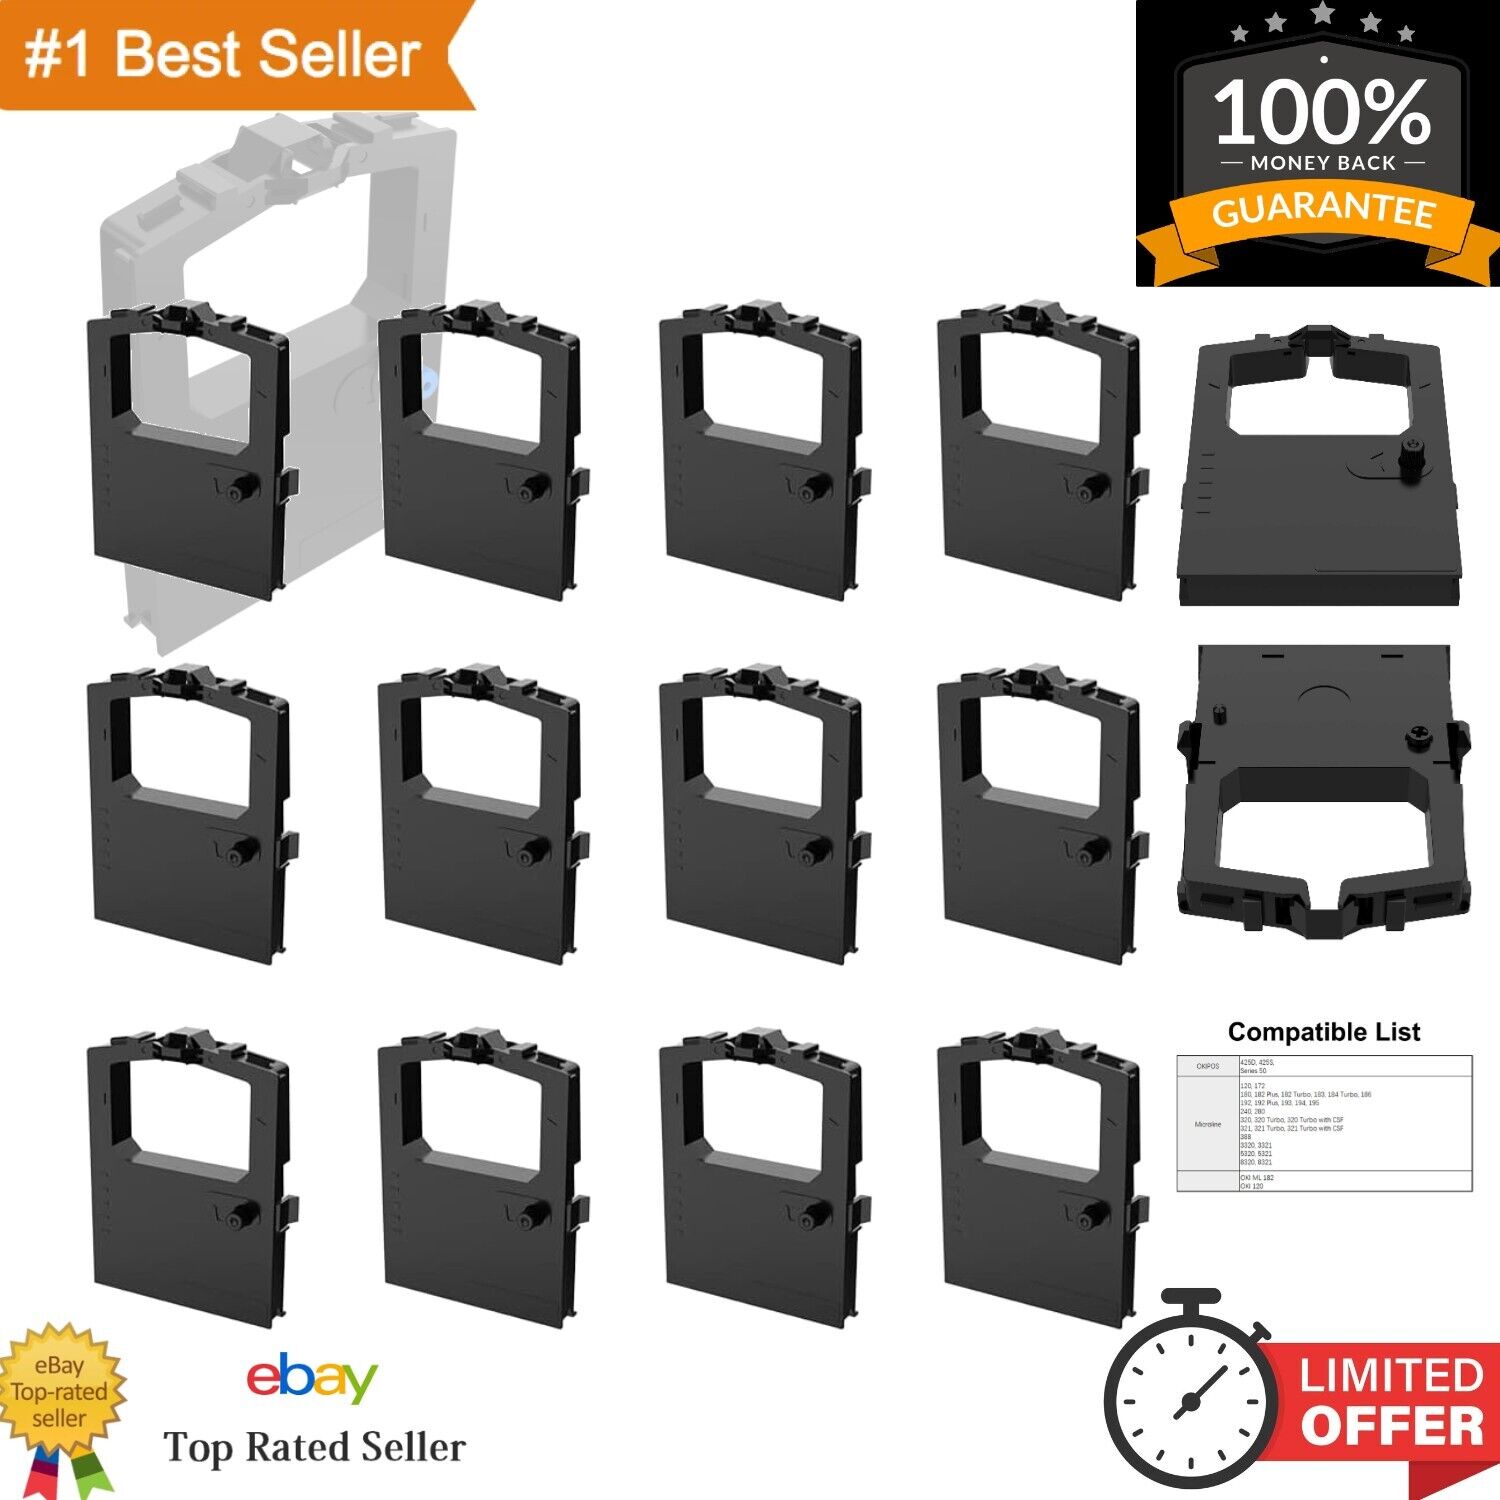 12-Pack Compatible Printer Ribbon Cartridge Replacements for Okidata 52102001...